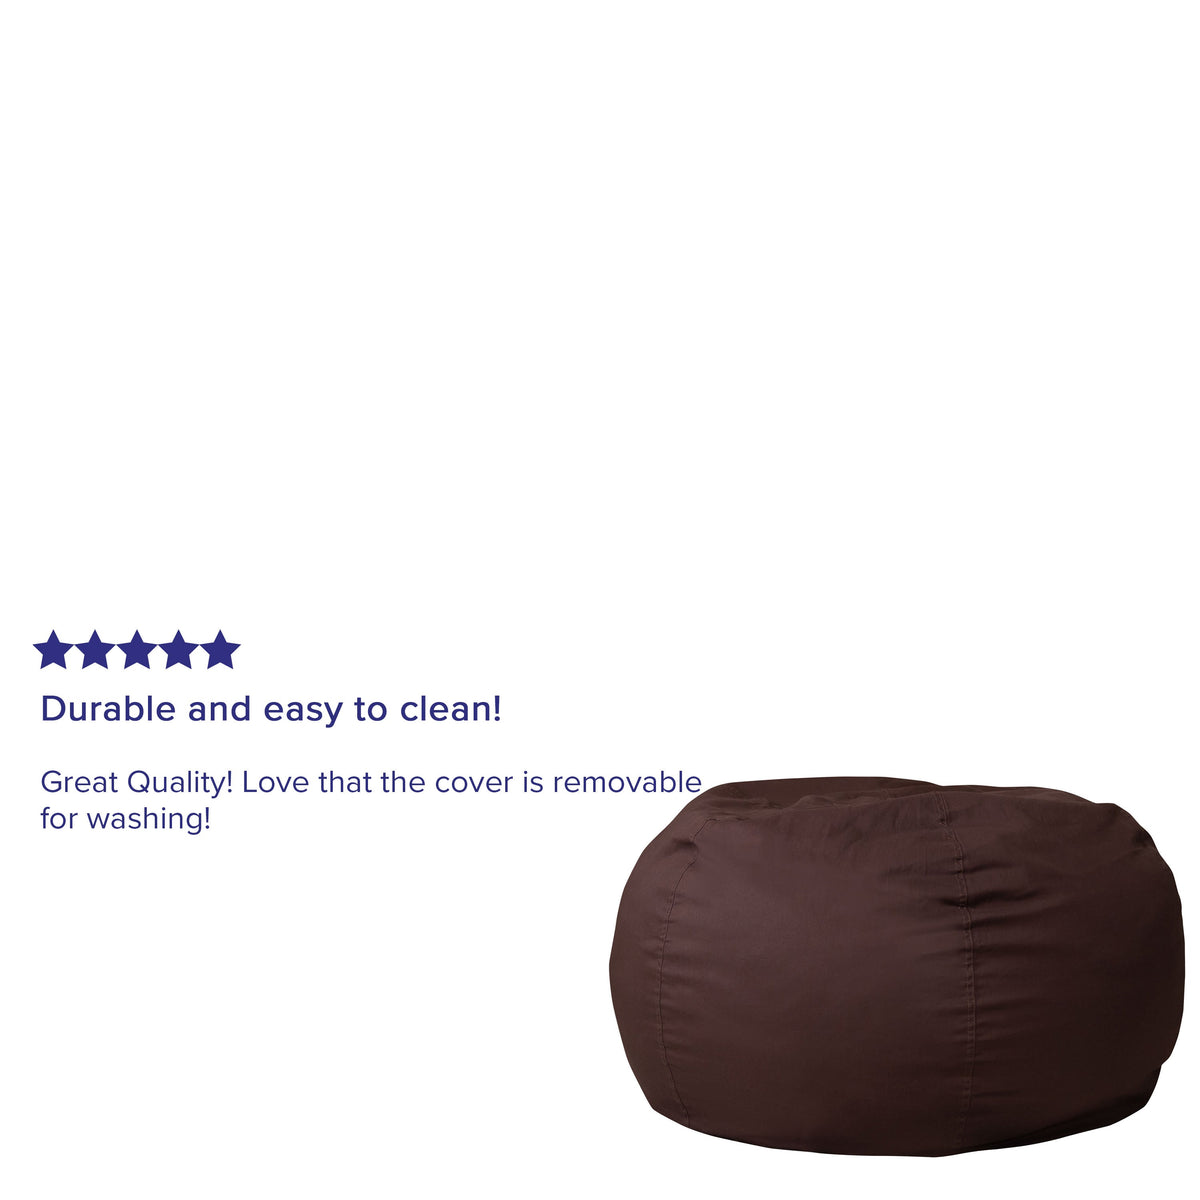 Brown |#| Oversized Solid Brown Refillable Bean Bag Chair for All Ages